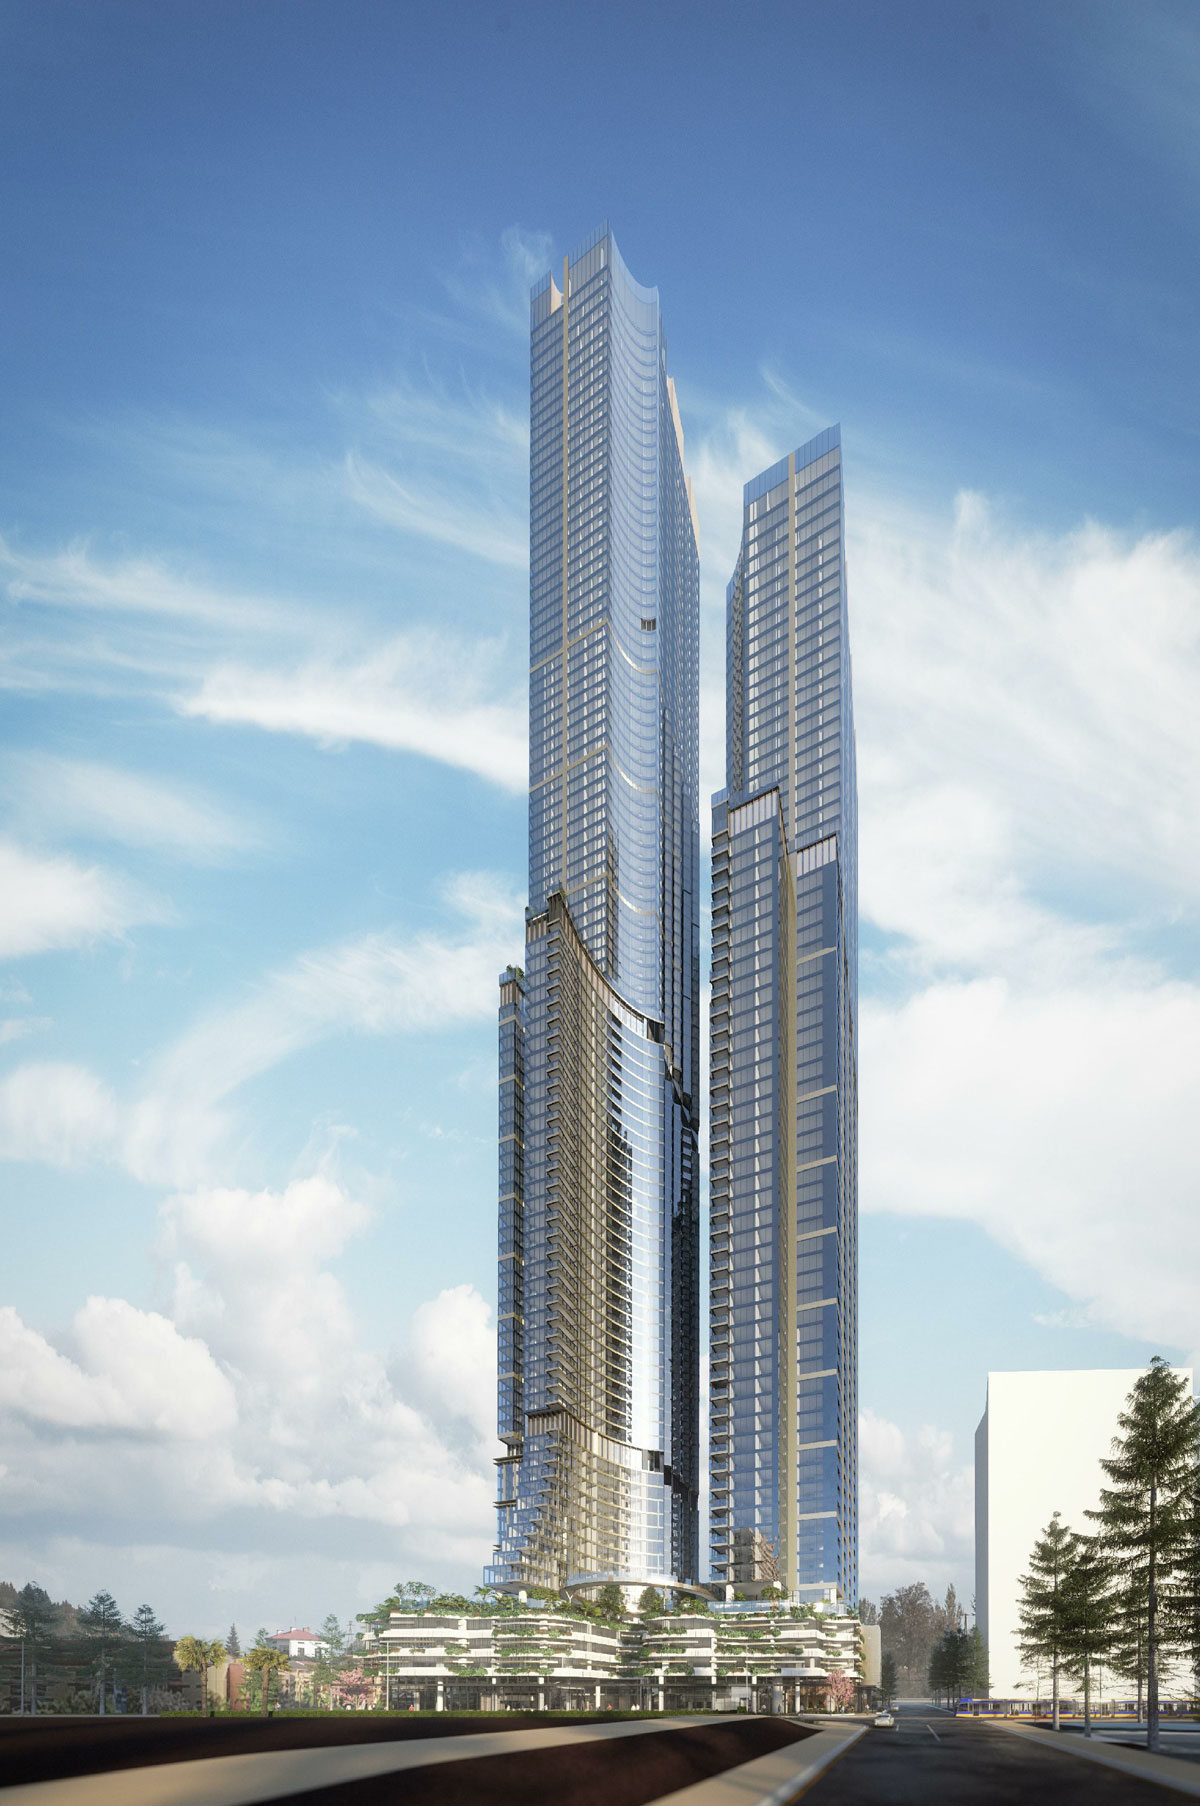 Artist's impression of proposed towers on Gold Coast skyline